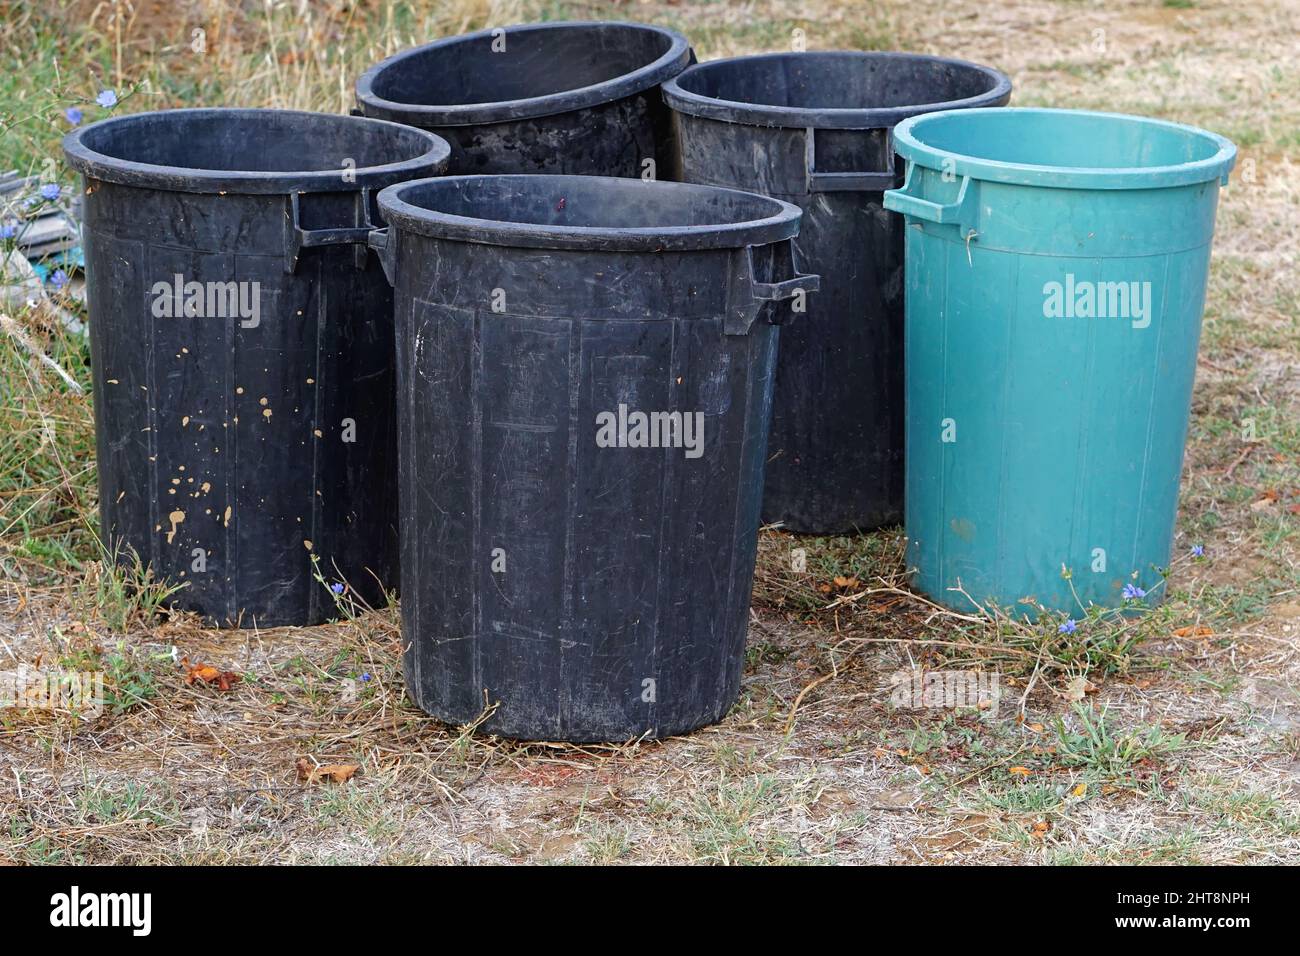 Many big plastic bucket with handles for farm use Stock Photo